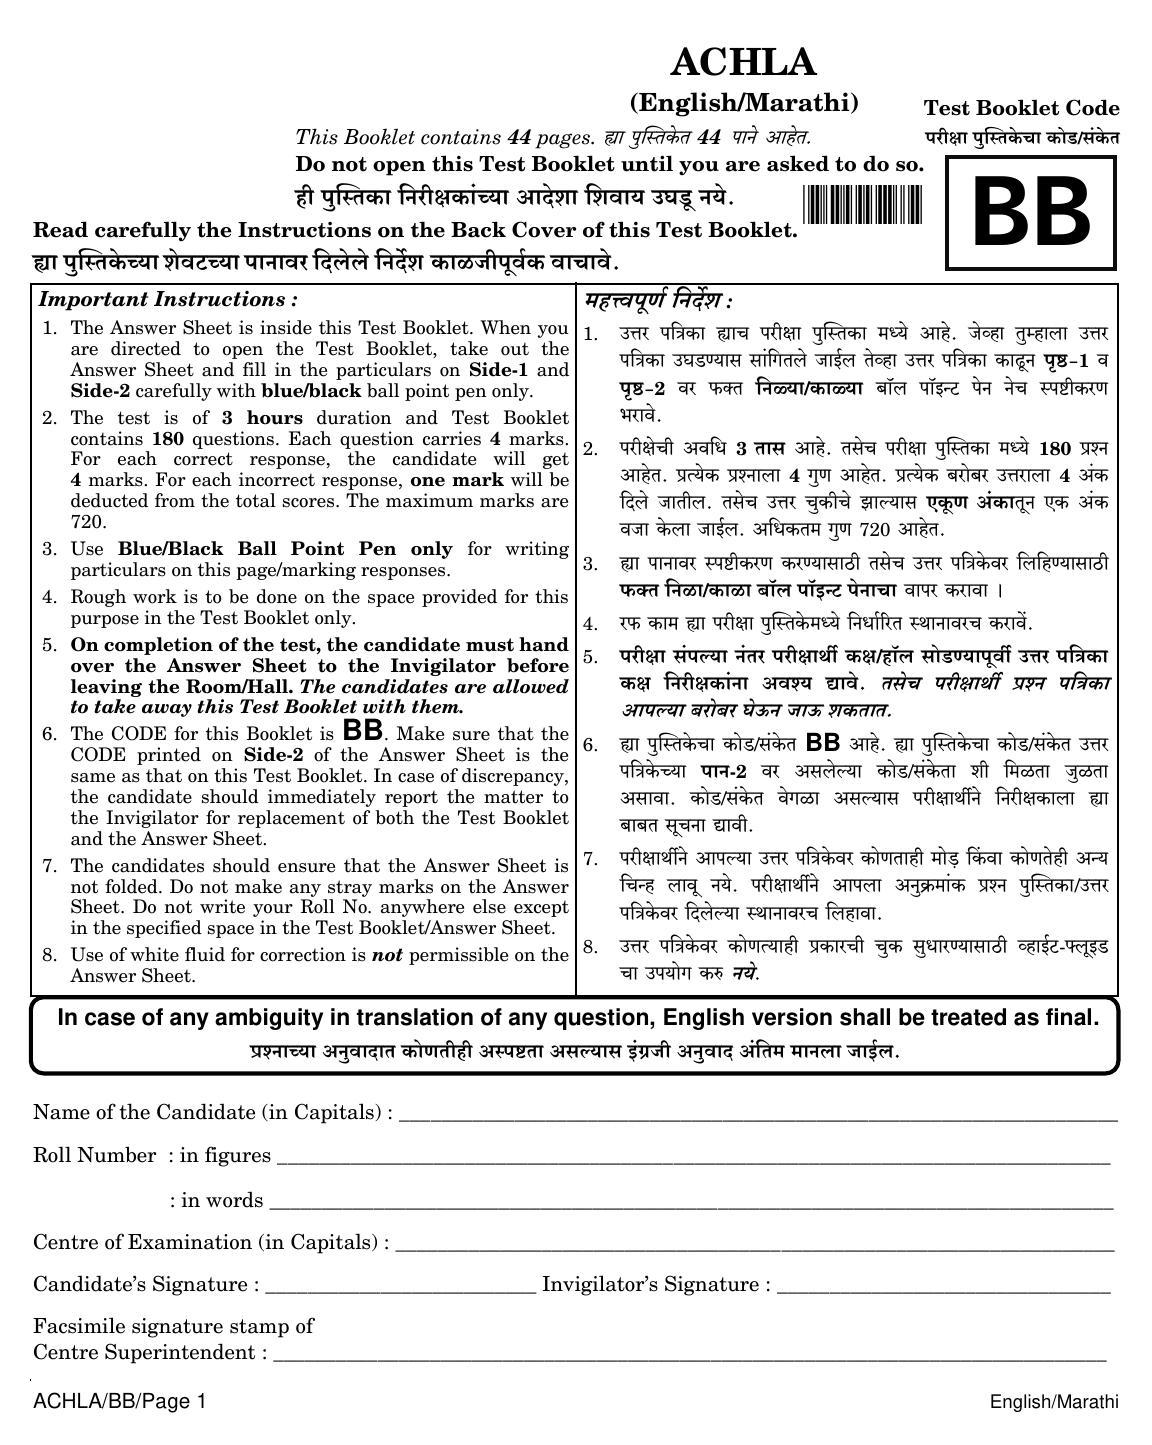 NEET Marathi BB 2018 Question Paper - Page 1